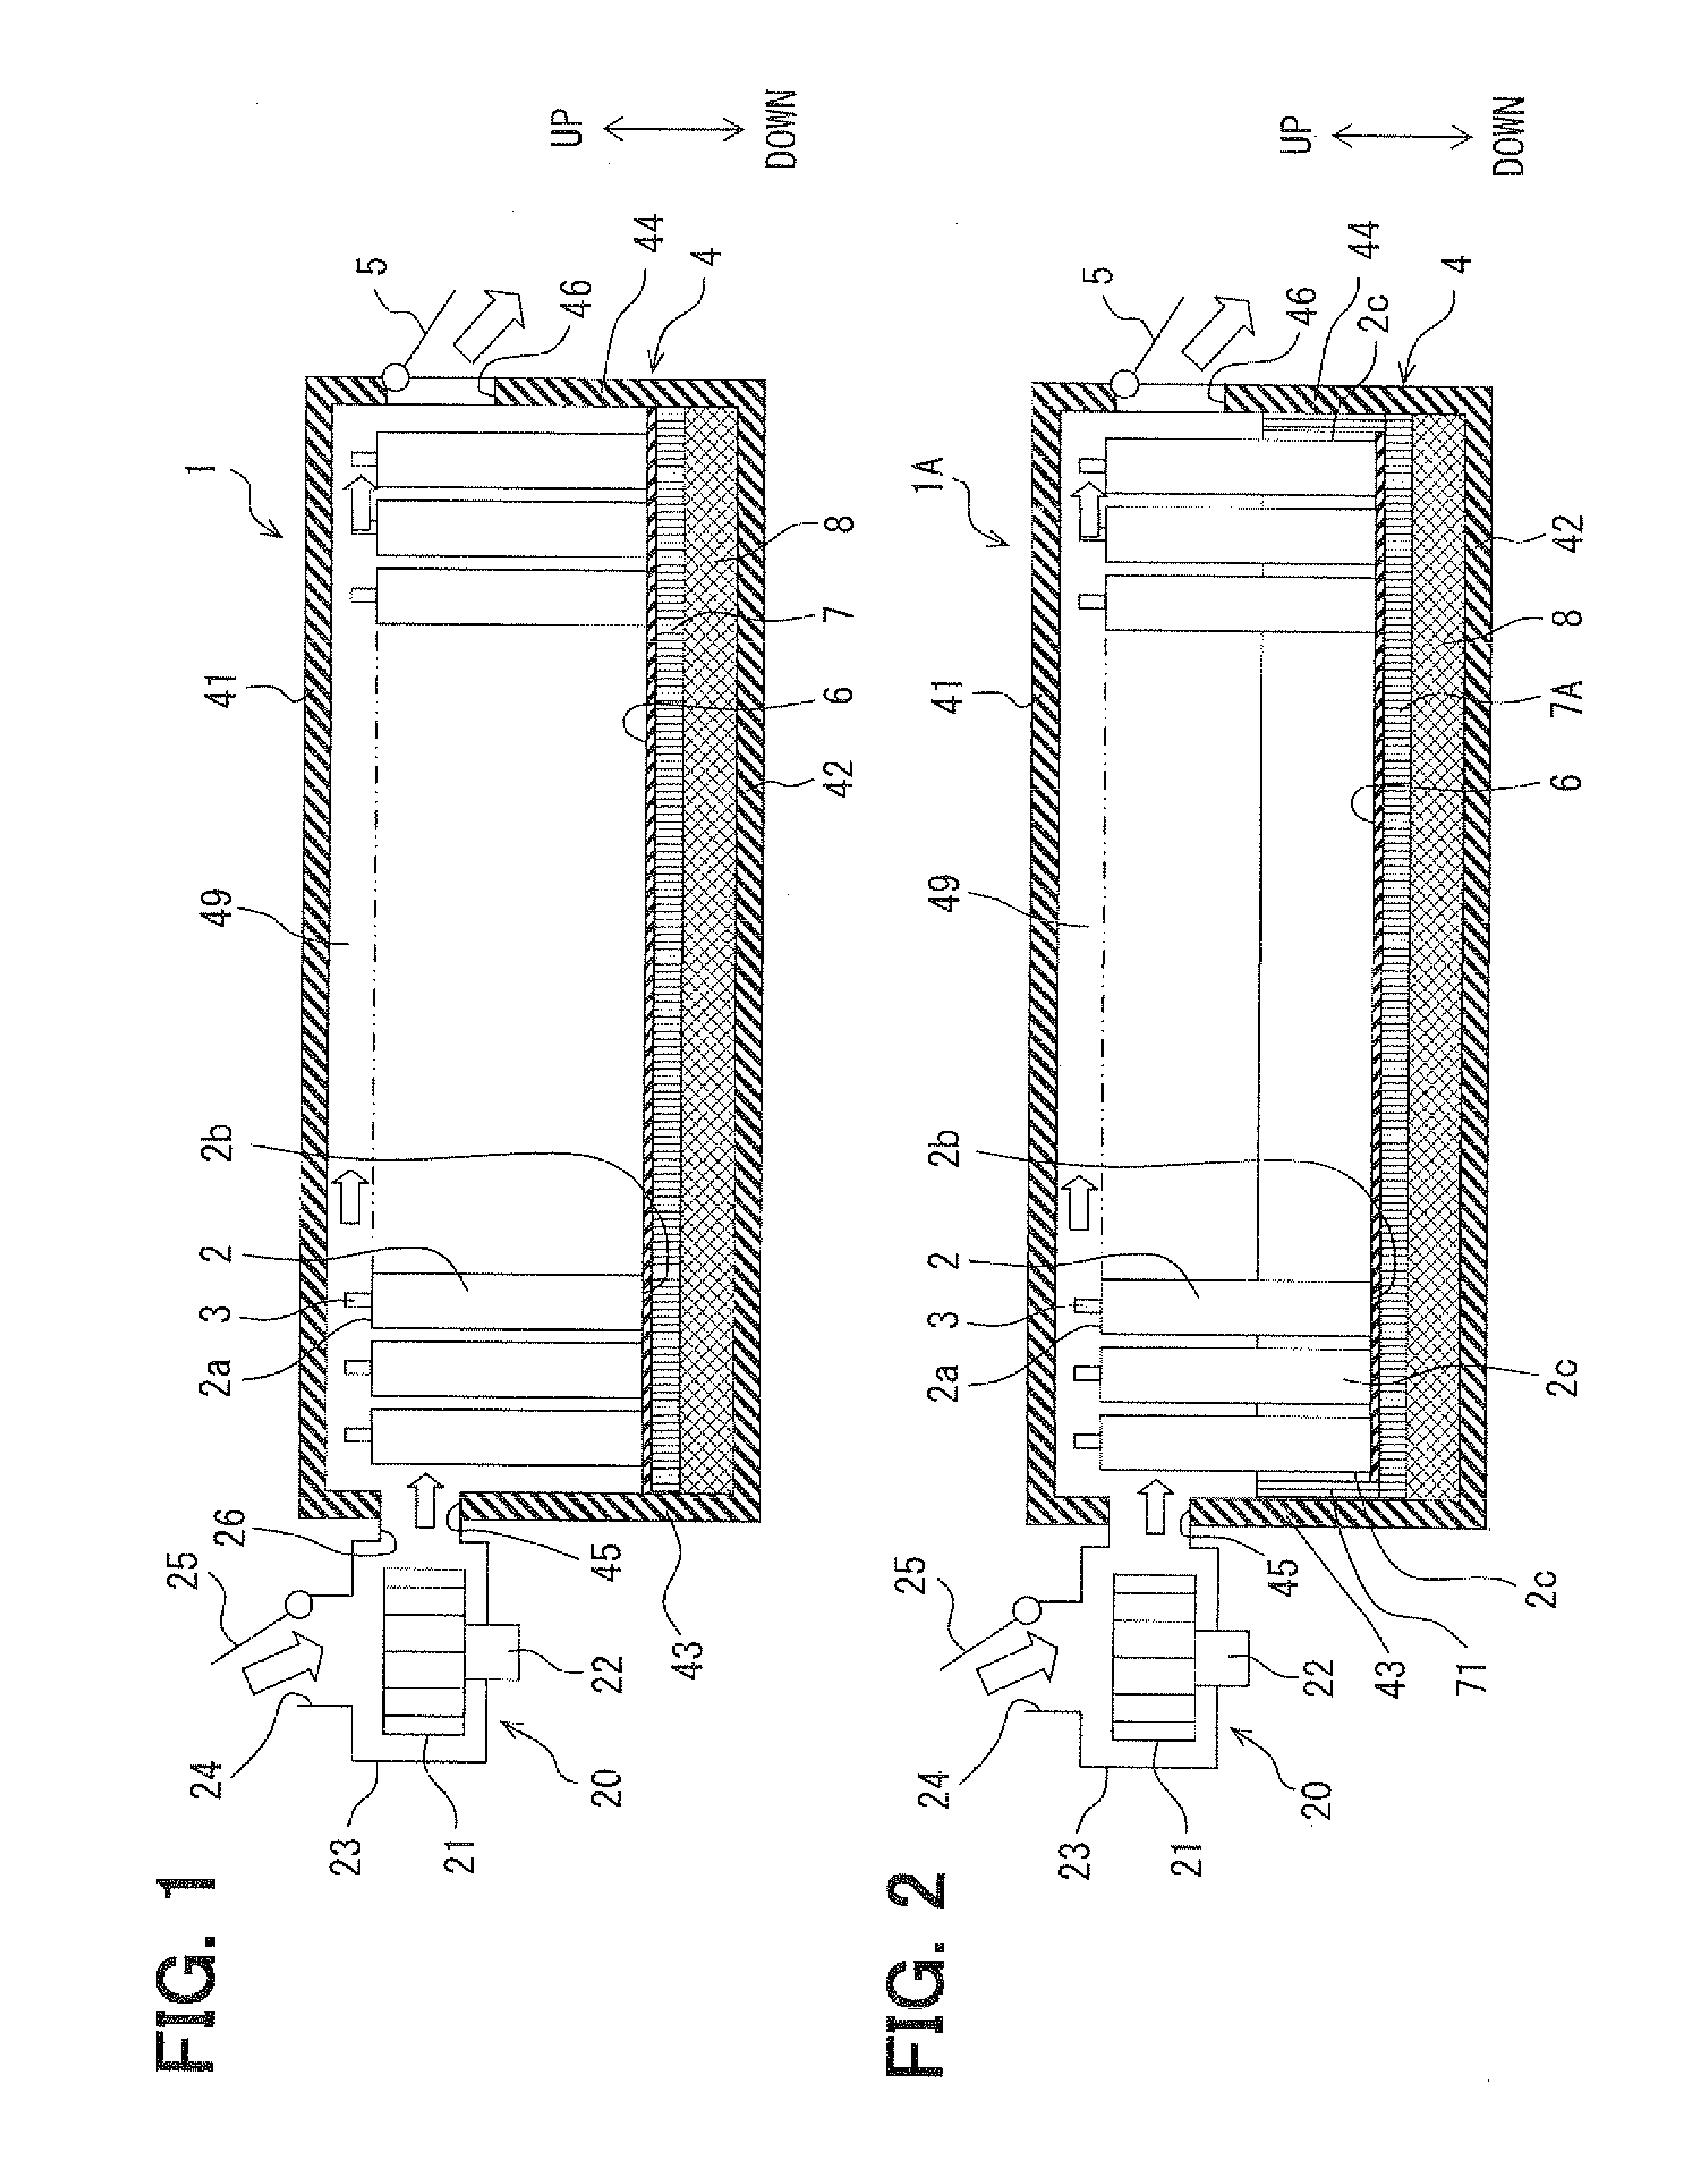 Electric power source device